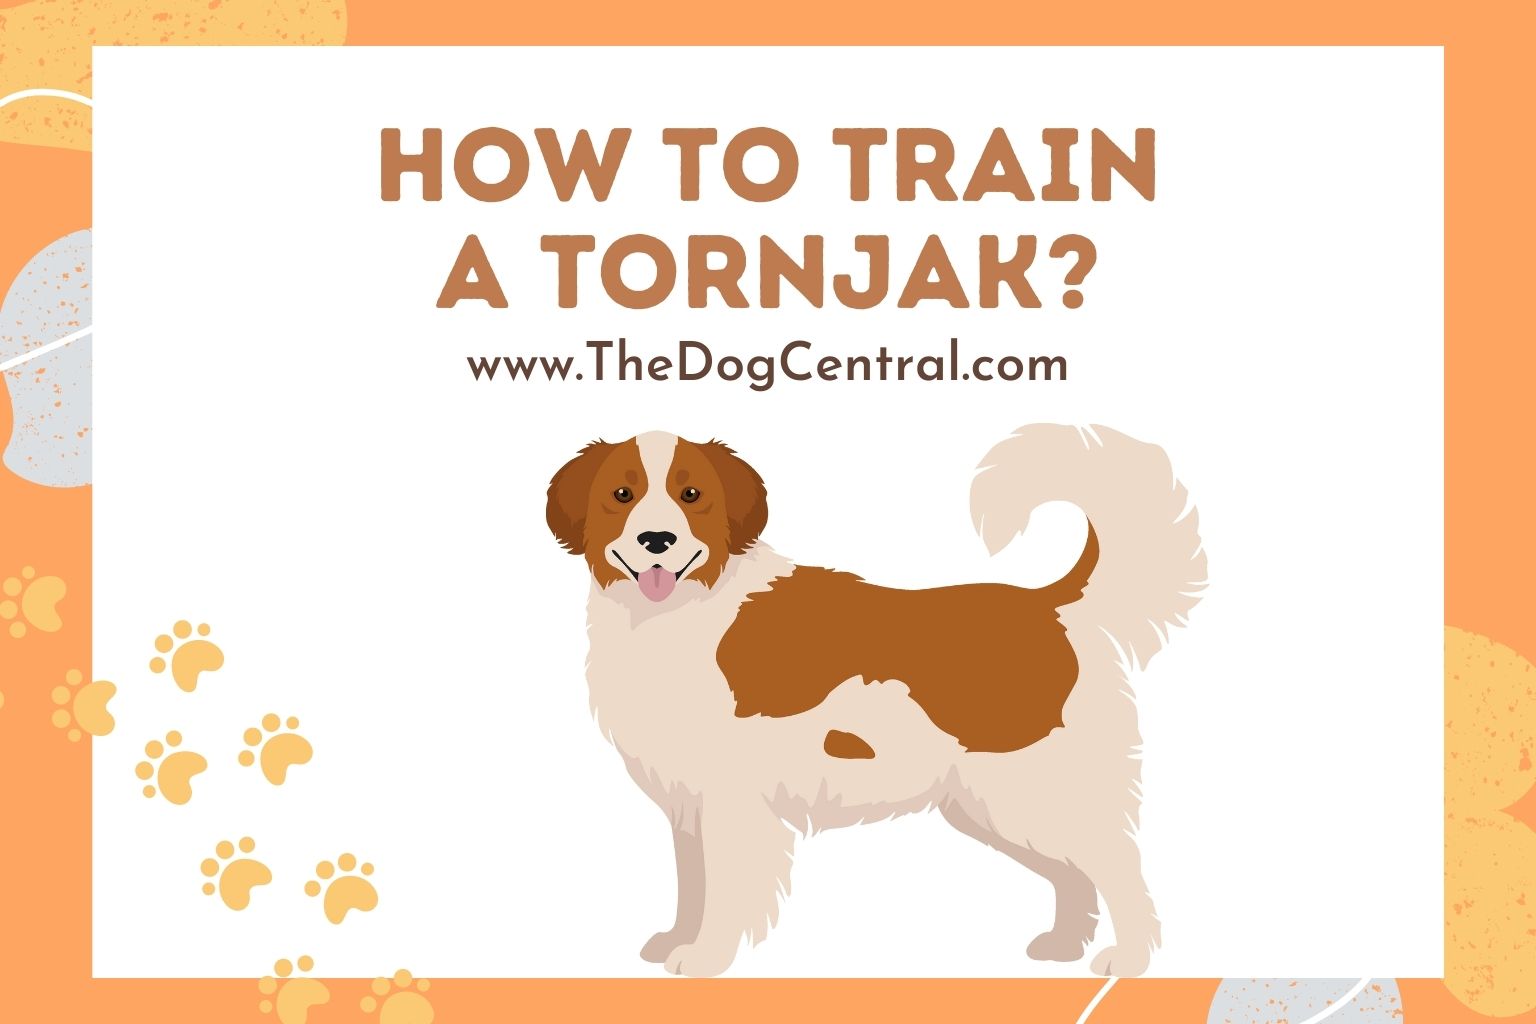 How to Train a Tornjak